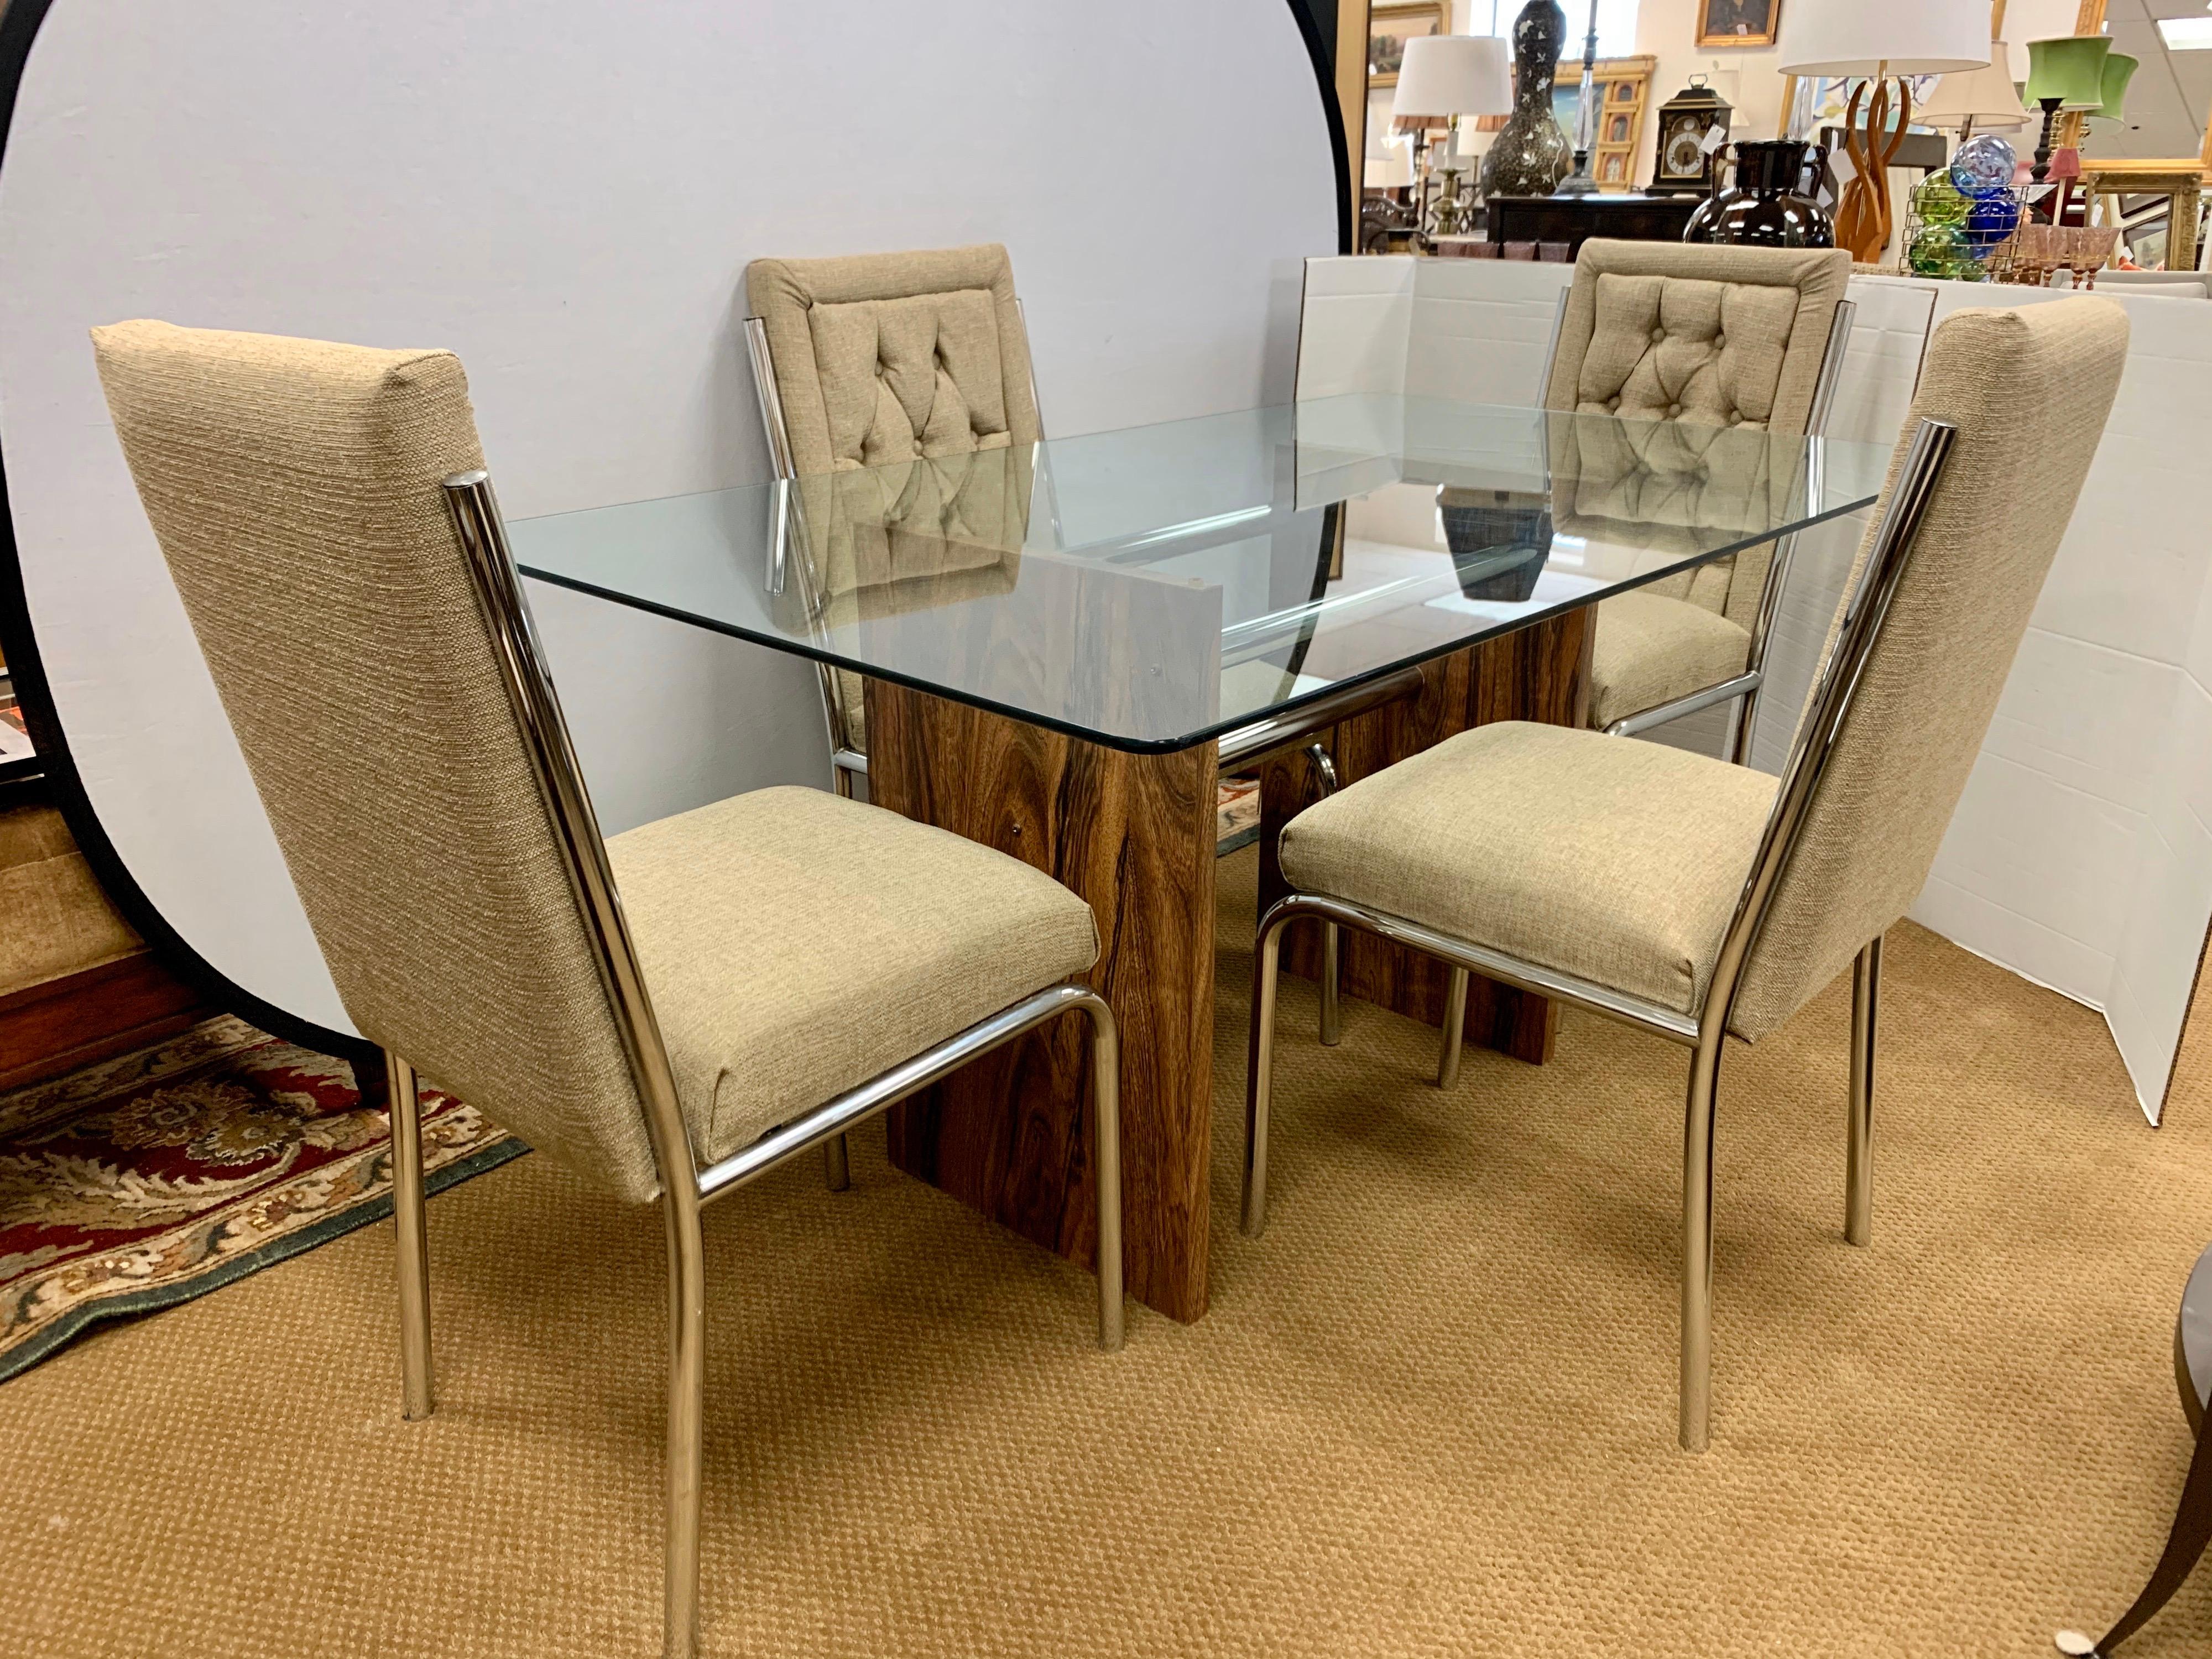 American Mid-Century Modern Milo Baughman Style Dining Room Set Table and Four Chairs